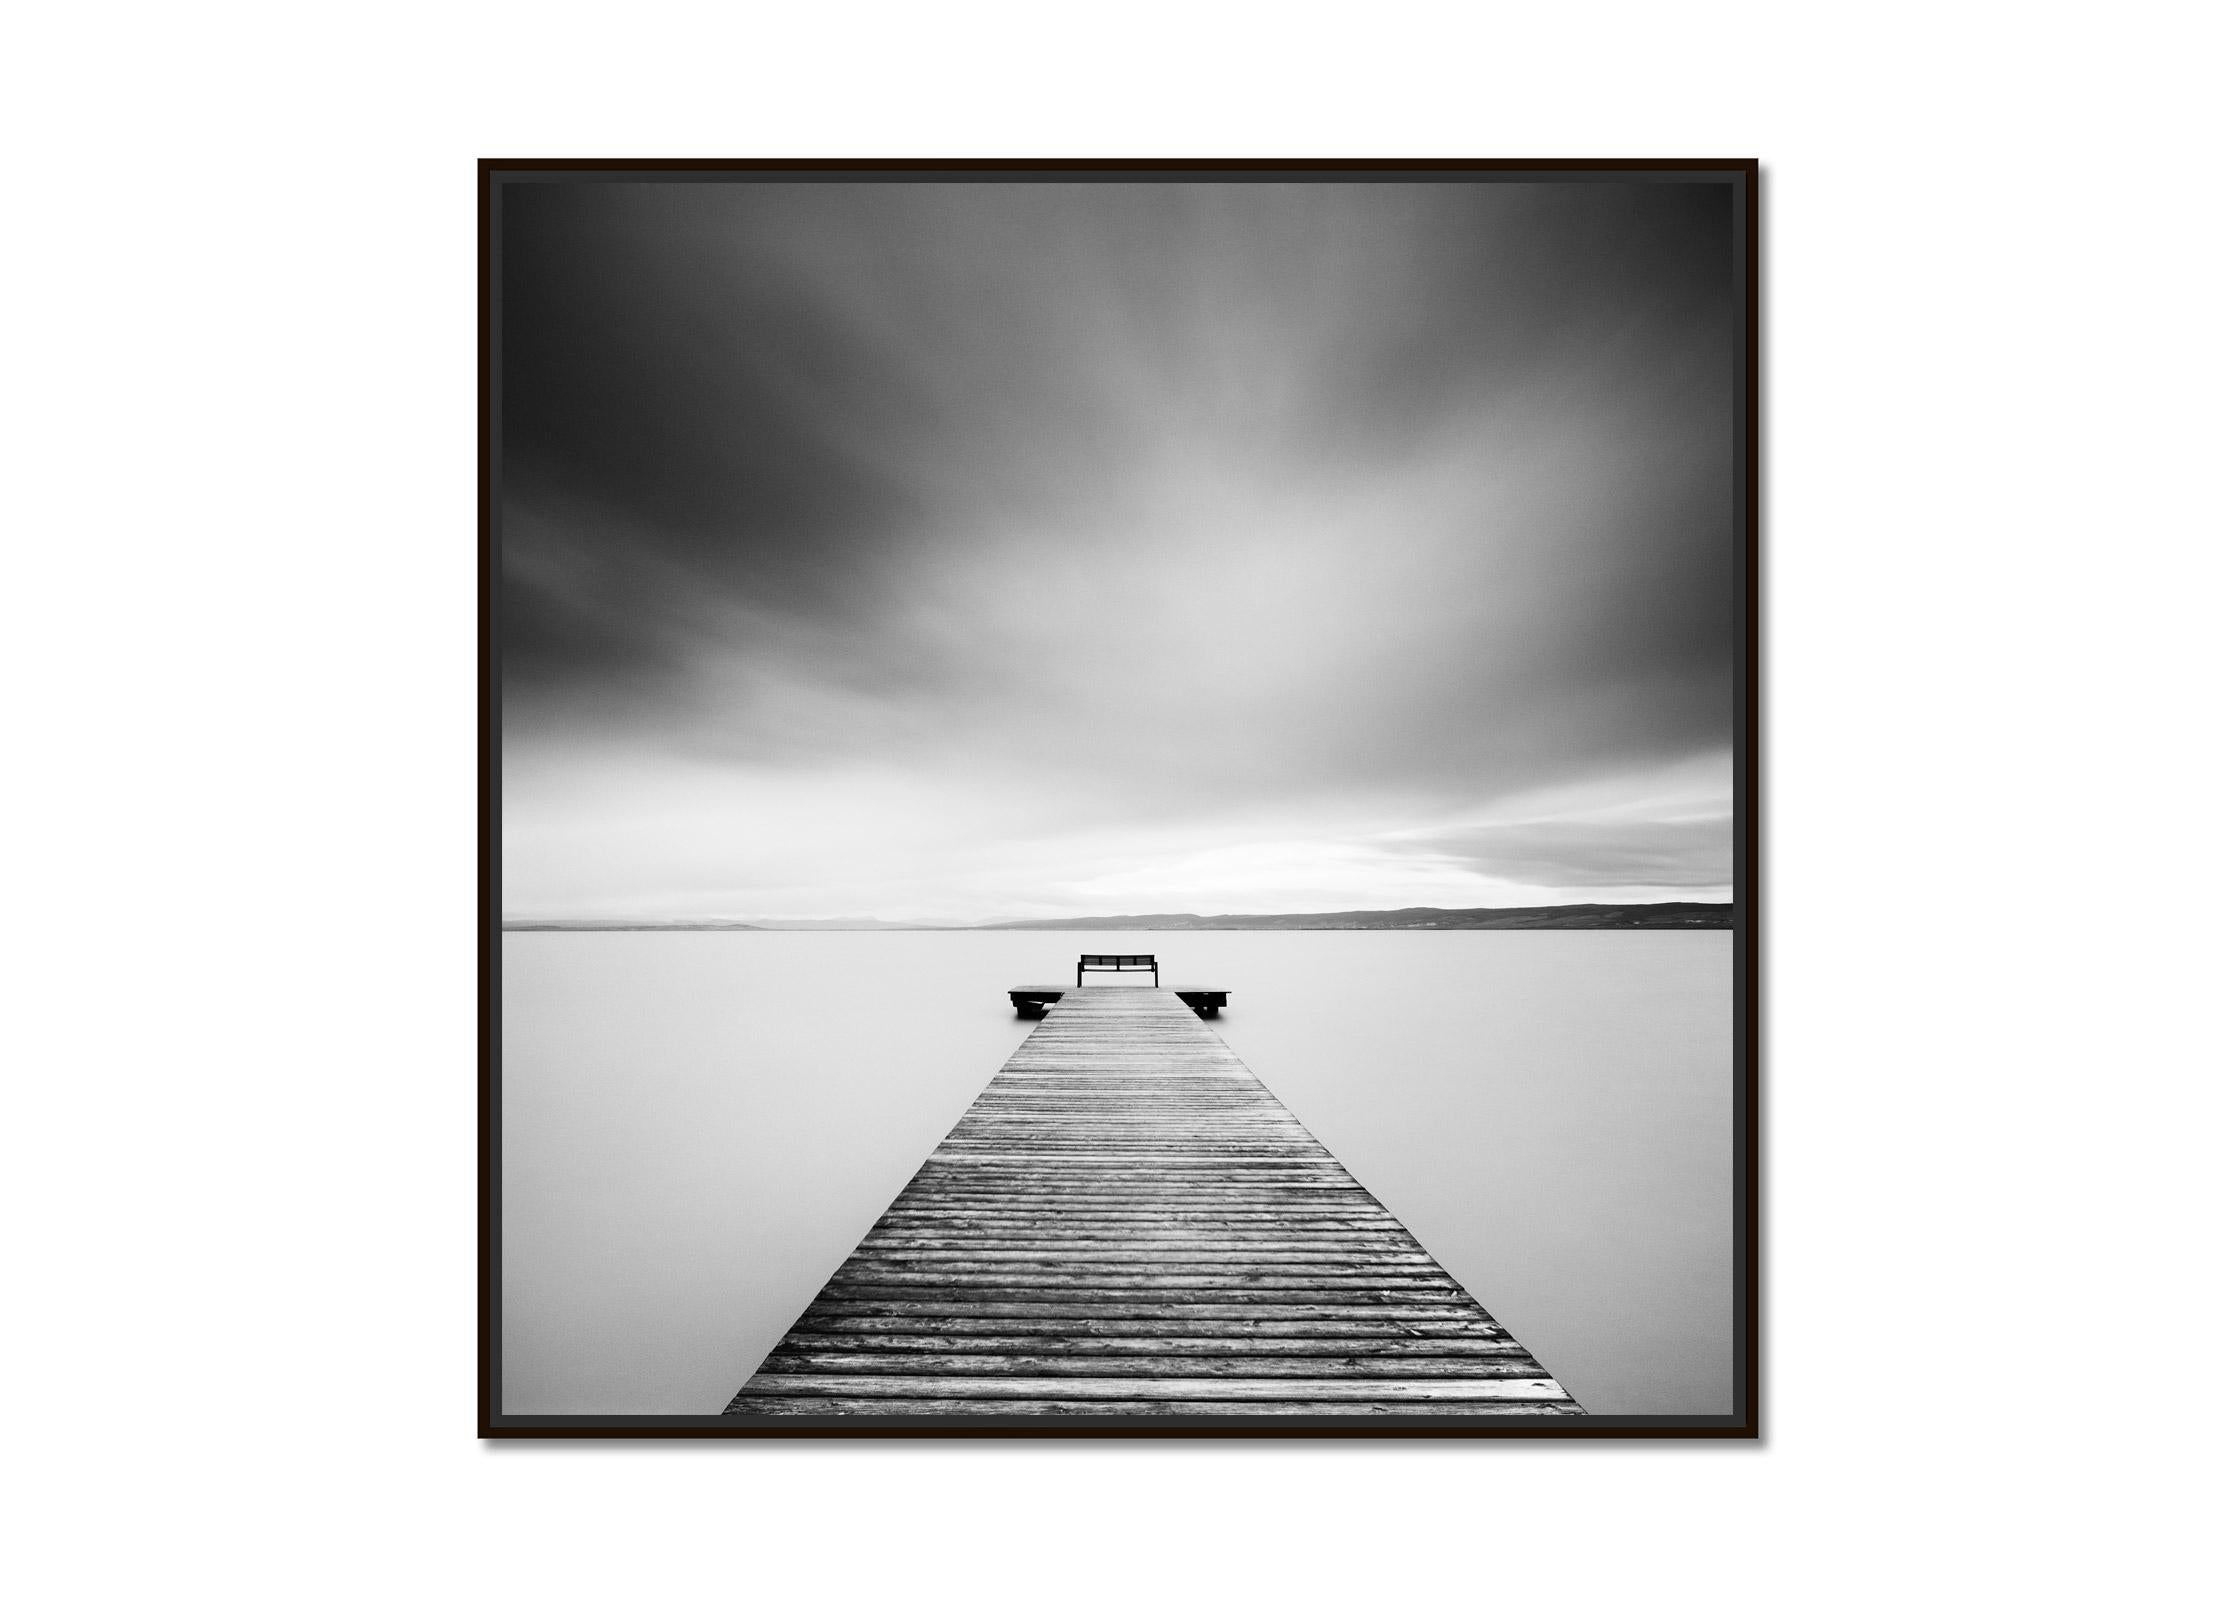 Storm Romance, Austria, Lake, black & white long exposure waterscape photography - Photograph by Gerald Berghammer